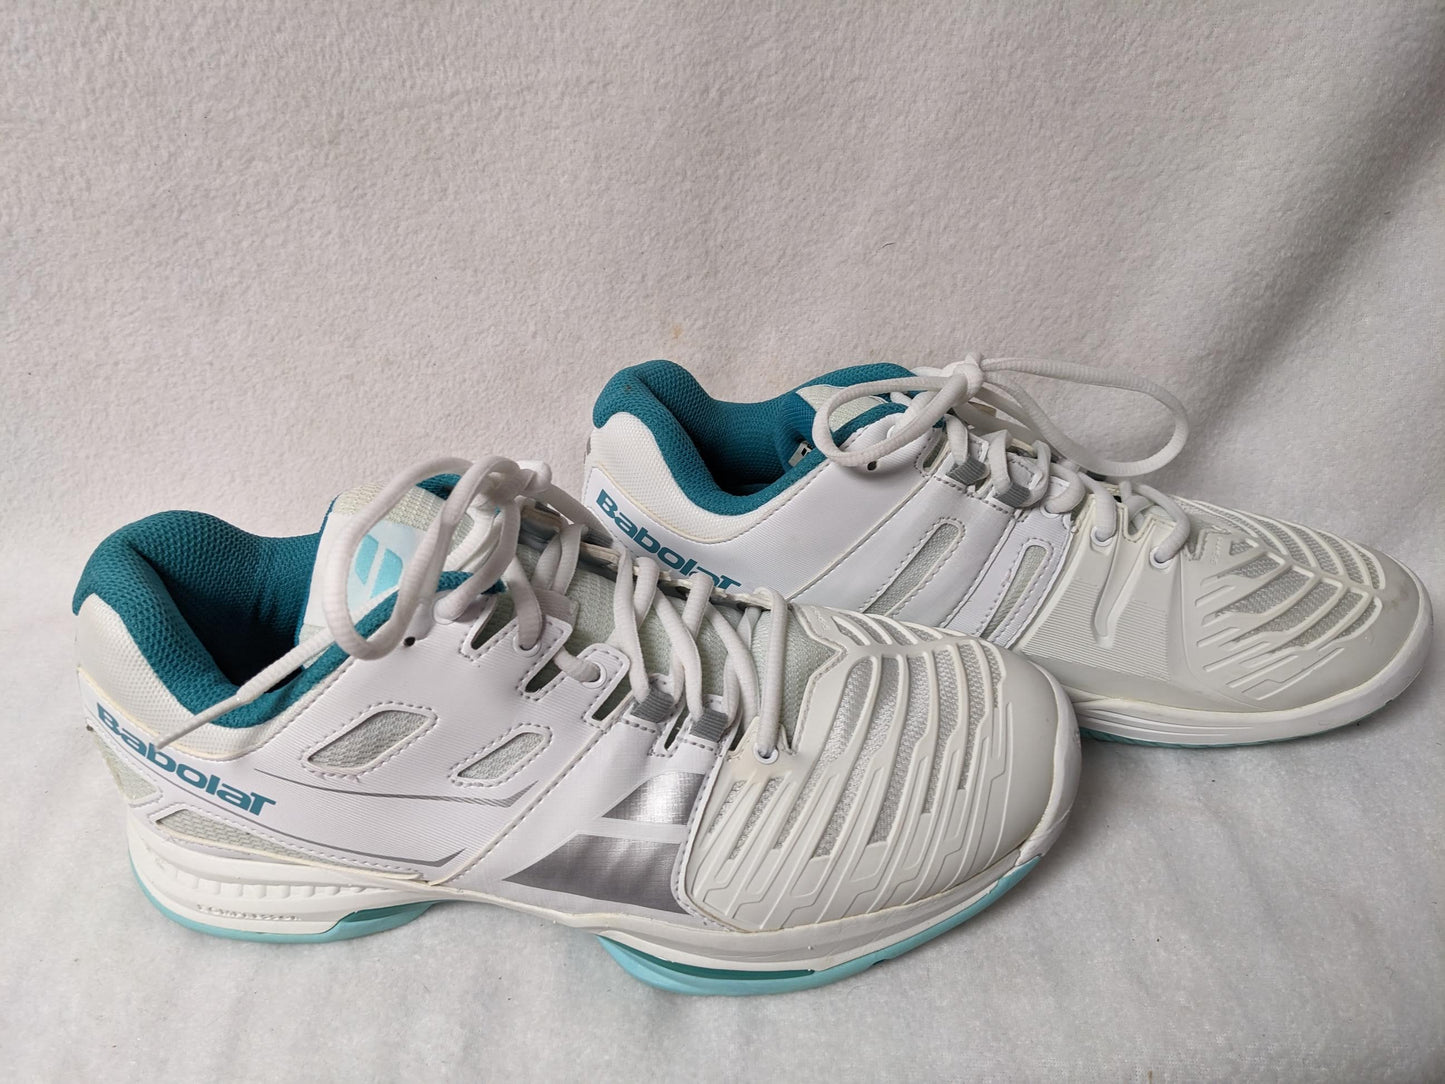 Bobolat Athletic Shoes Size 10 Color White Condition Used